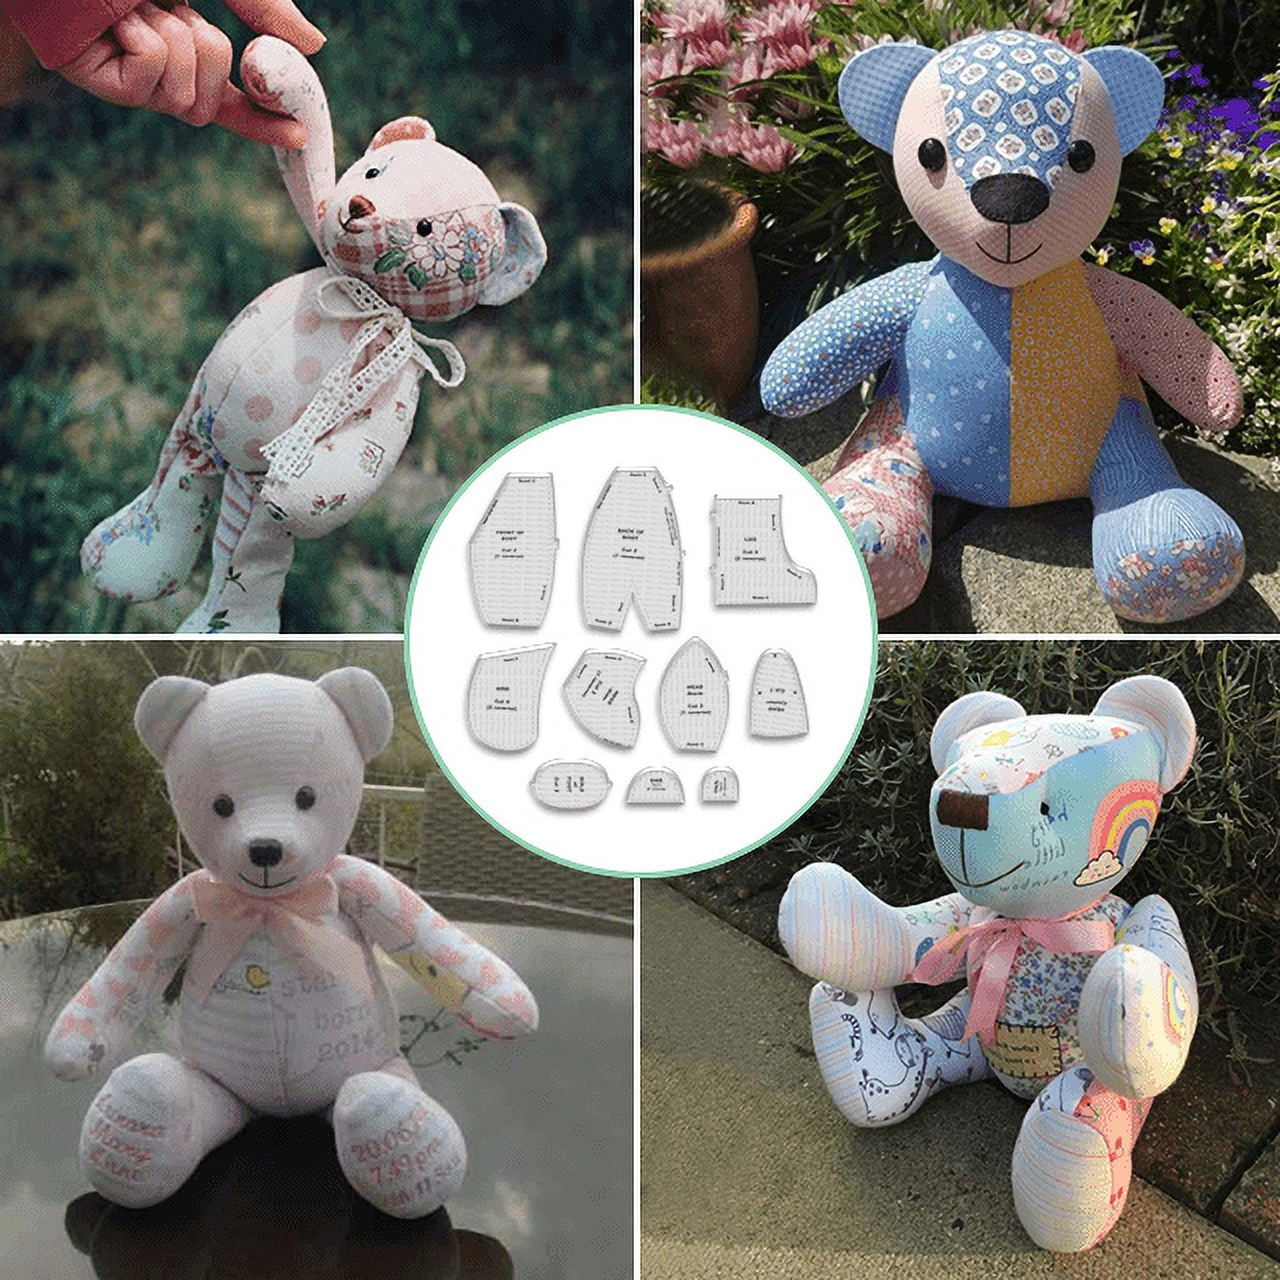 Xerdsx Memory Bear Template Ruler Set, Sewing Patterns for Beginners,  Memory Bear Sewing Patterns Template Sewing Rulers with Instructions 